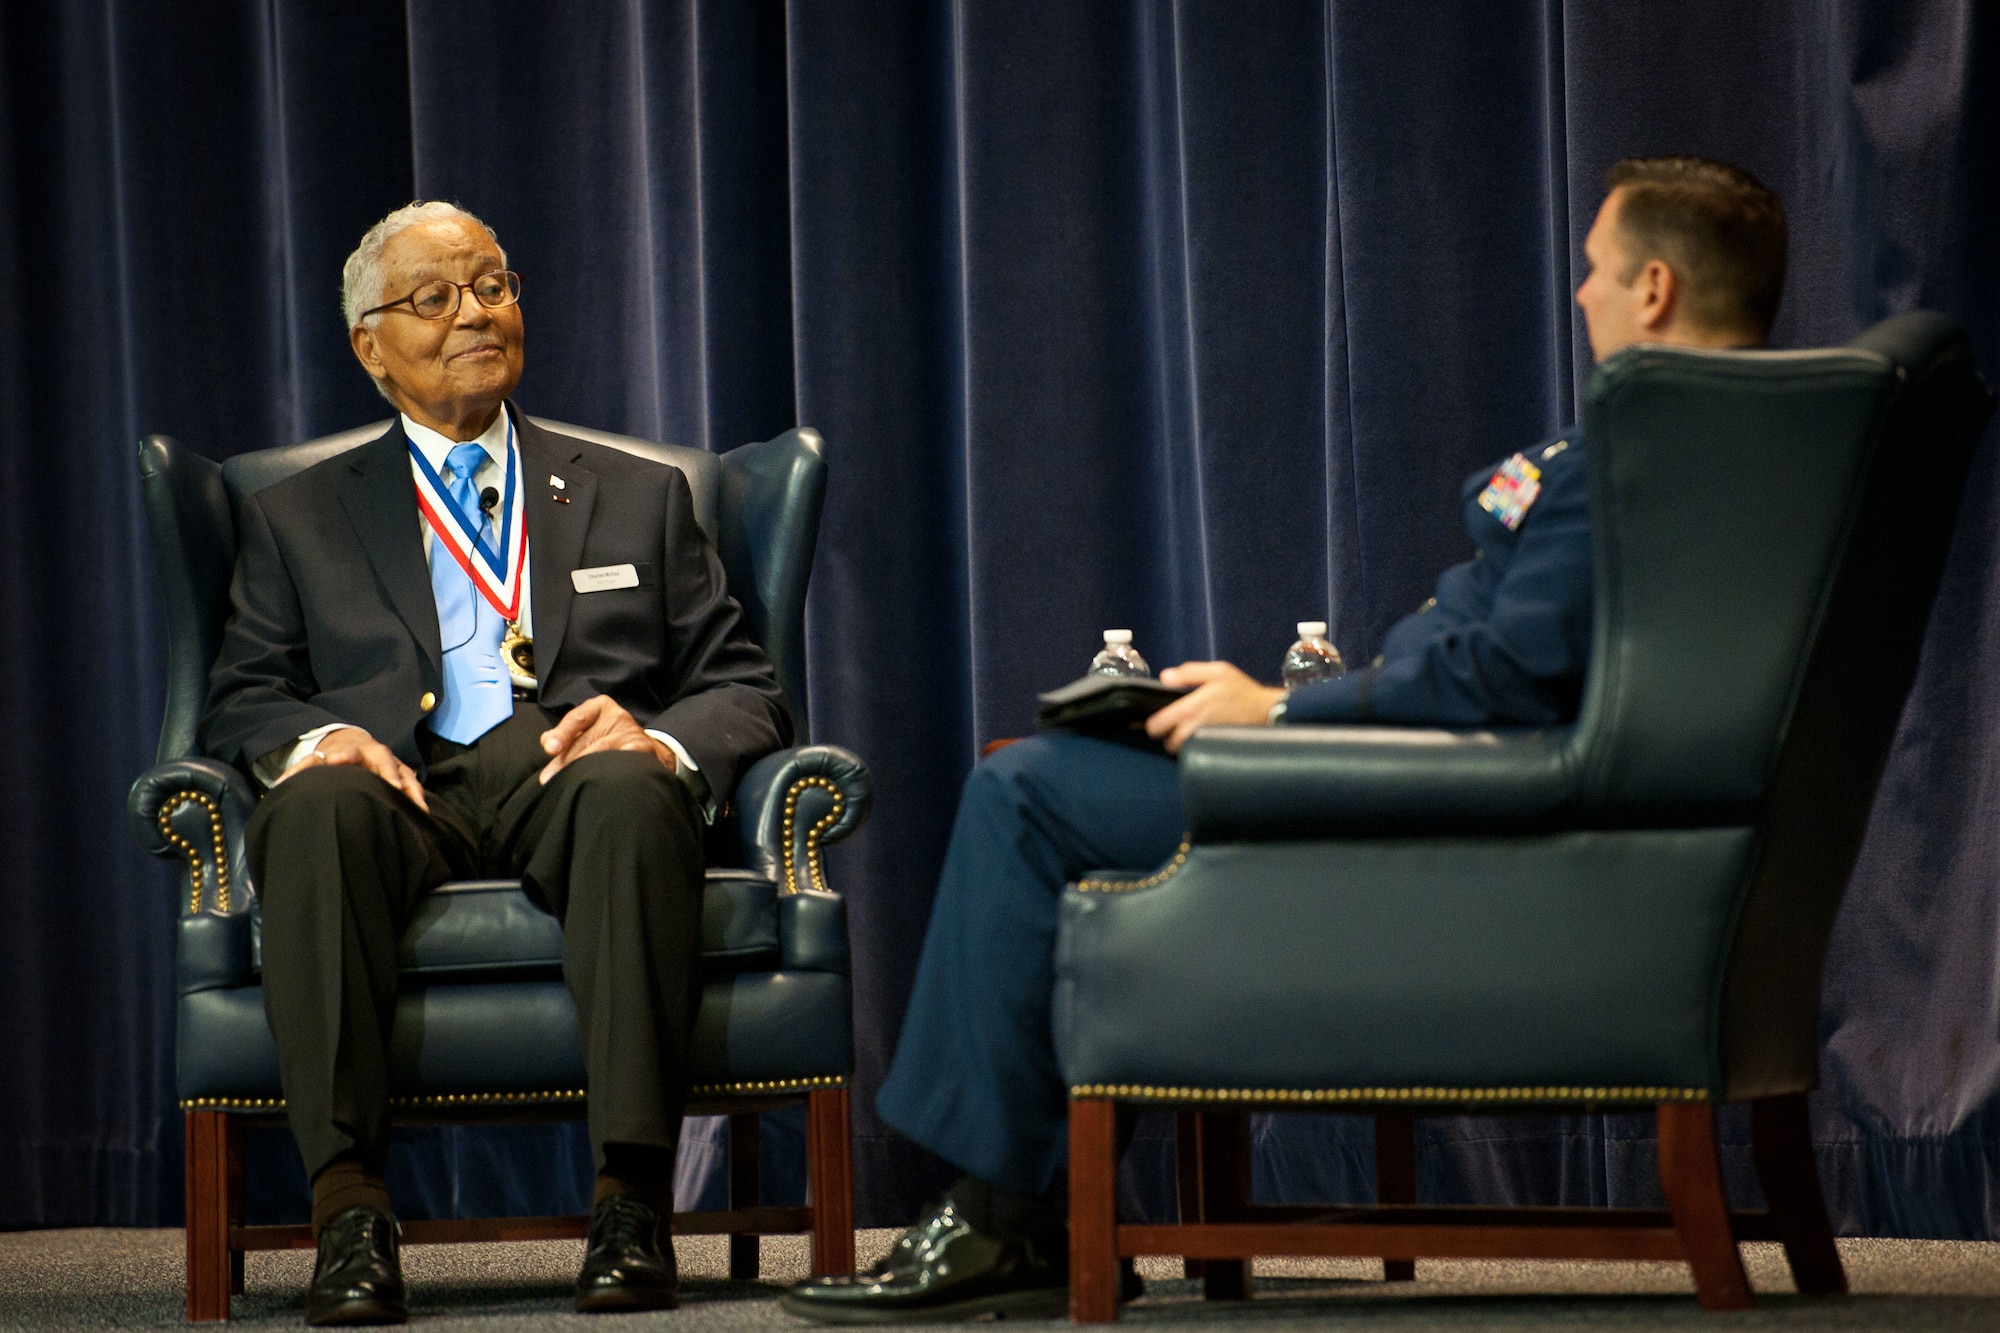 Col Charles E. McGee, retired, is interviewed by ACSC Student, Maj Daniel Thompson during the 2013 Gather of Eagles at the Air Command and Staff College Thursday 6 May 2013. Col McGee started his military career breaking barriers with the 99th Fighter Squadron of the 332nd Fighter Group, the famed "Tuskegee Airmen". His flying career continued during Korea and Vietnam, earning the highest three-war total for fighter missions of any Air Force Aviator. McGee was recognized with the Congressional Gold Medal of Honor, one of the nation's highest civilian awards.
Gathering of Eagles is a year long, student-run research elective at Air Command and Staff College, which through biographical studies and personal interviews with the student-selected Eagles collects, educates and advocates air, space and cyberspace history.USAF Photograph by Donna L. Burnett